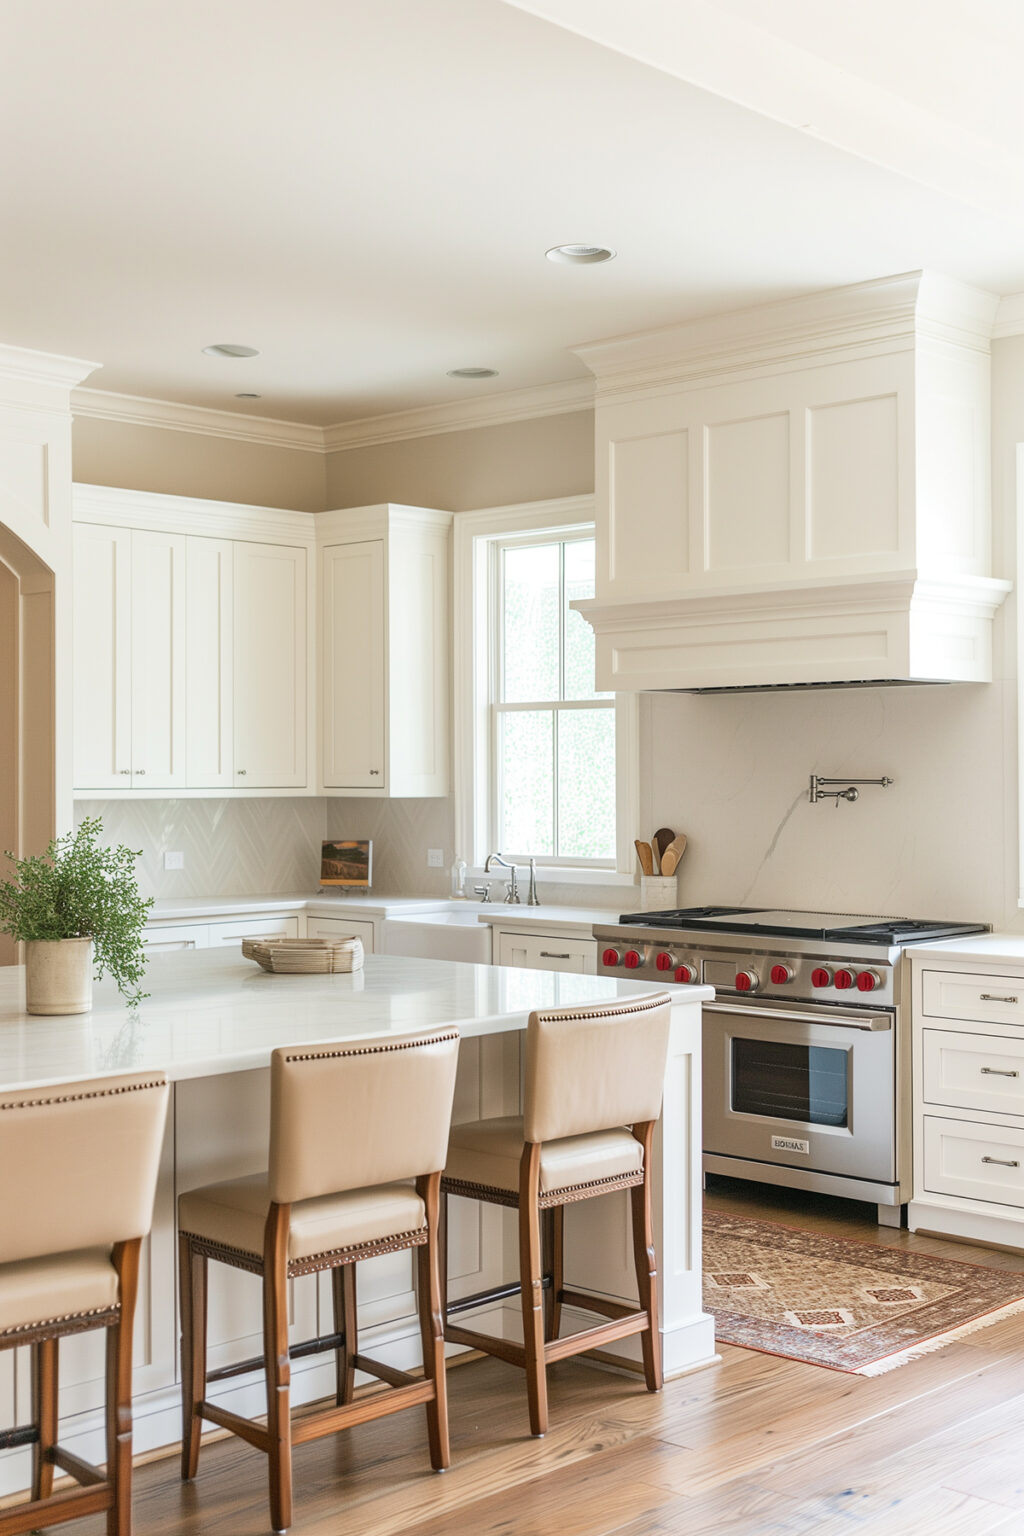 10 Paint Colors You'll Love For Your Small Kitchen - Jenna Kate at Home